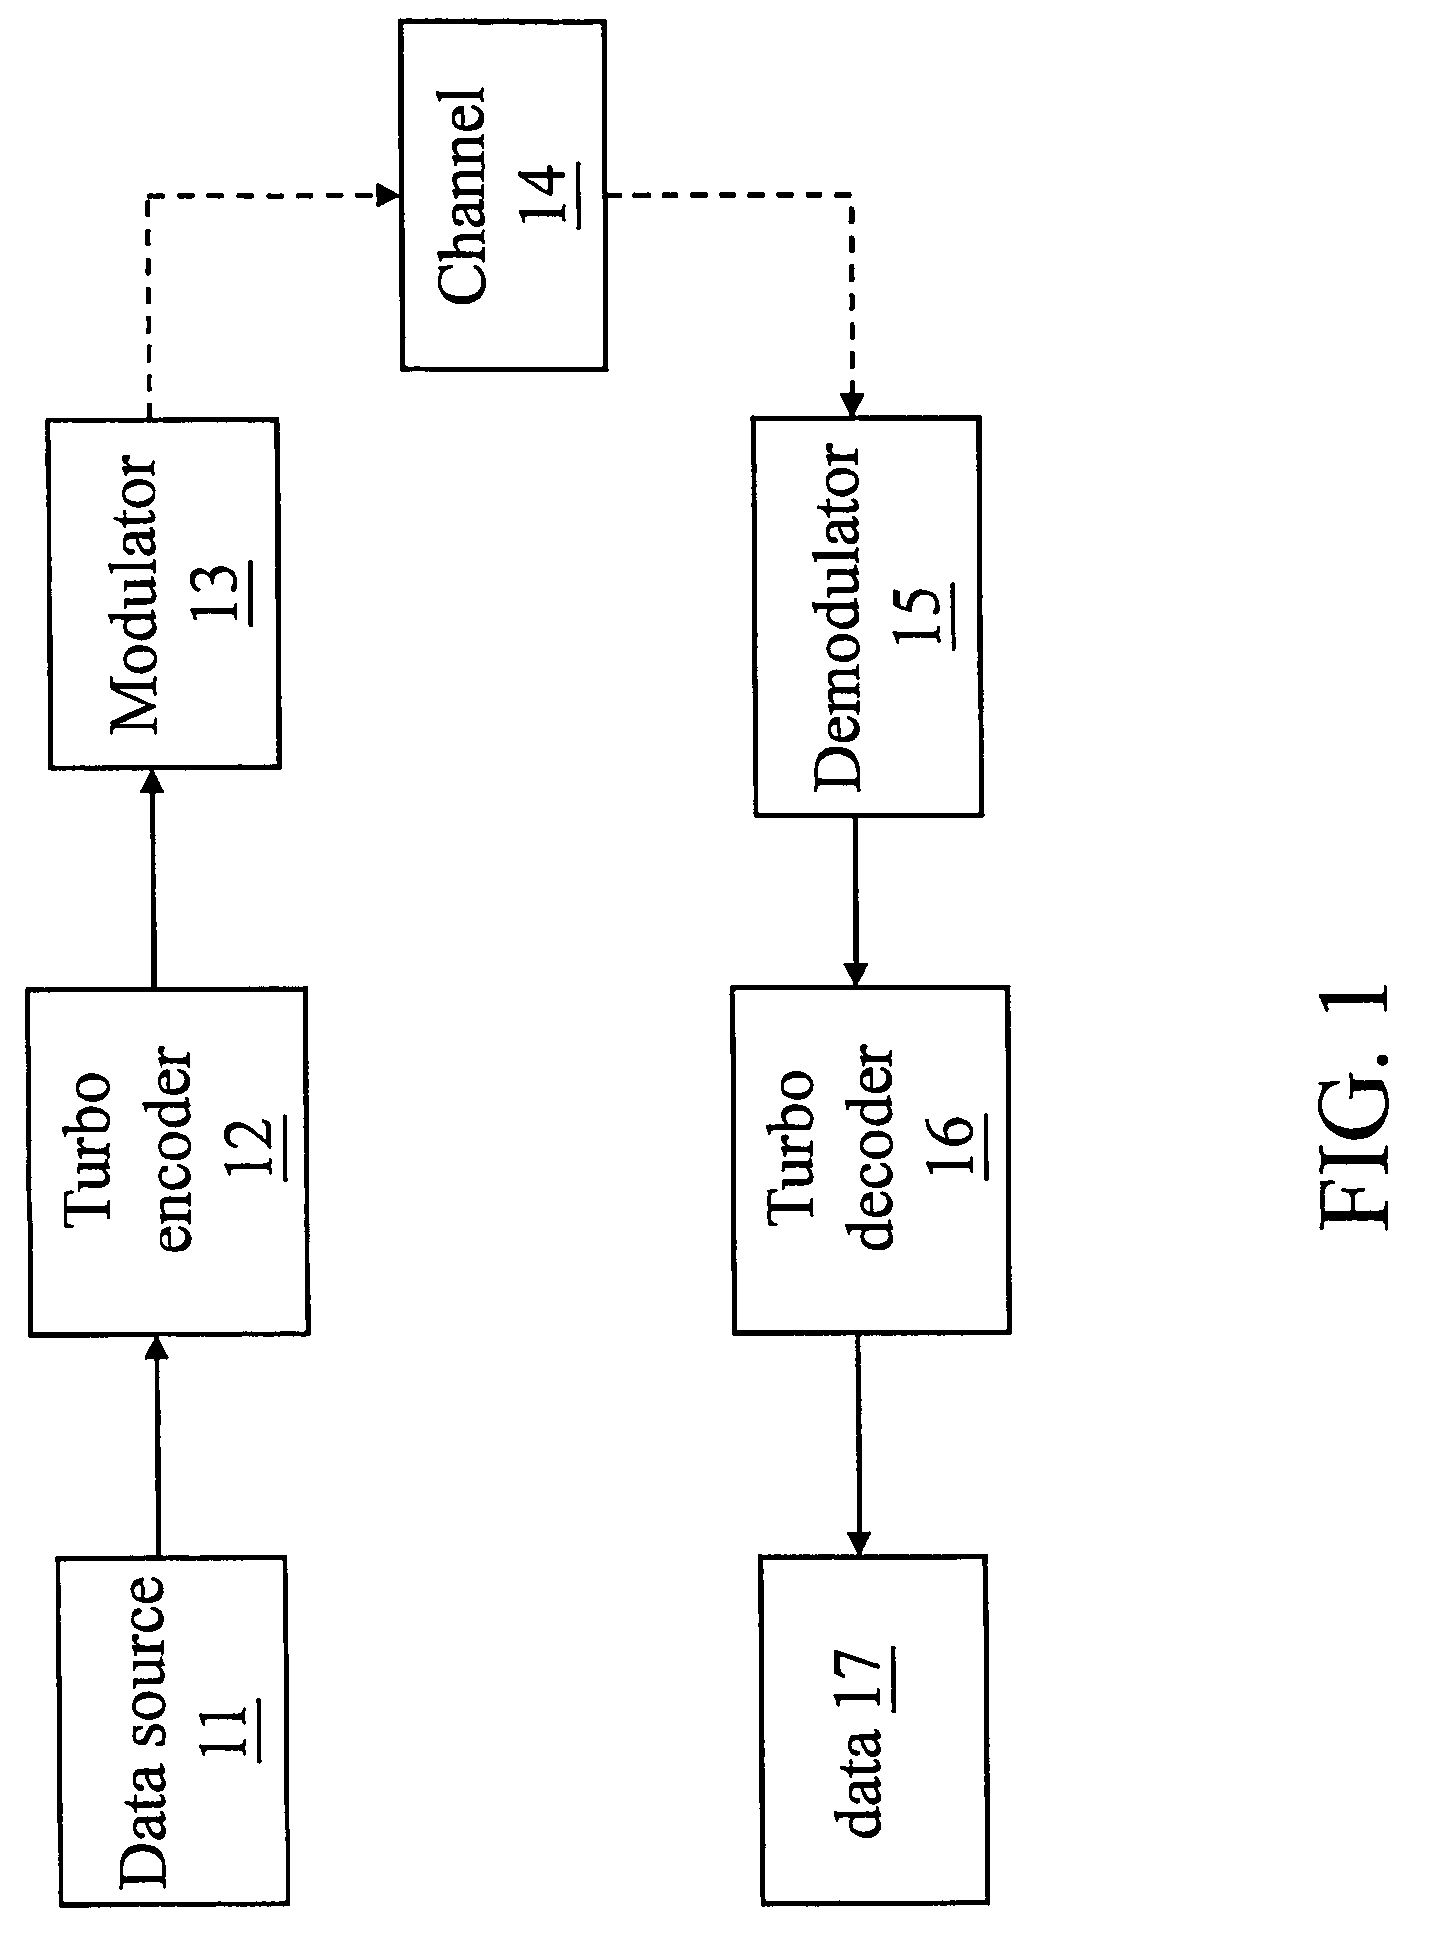 Apparatus of multi-stage network for iterative decoding and method thereof